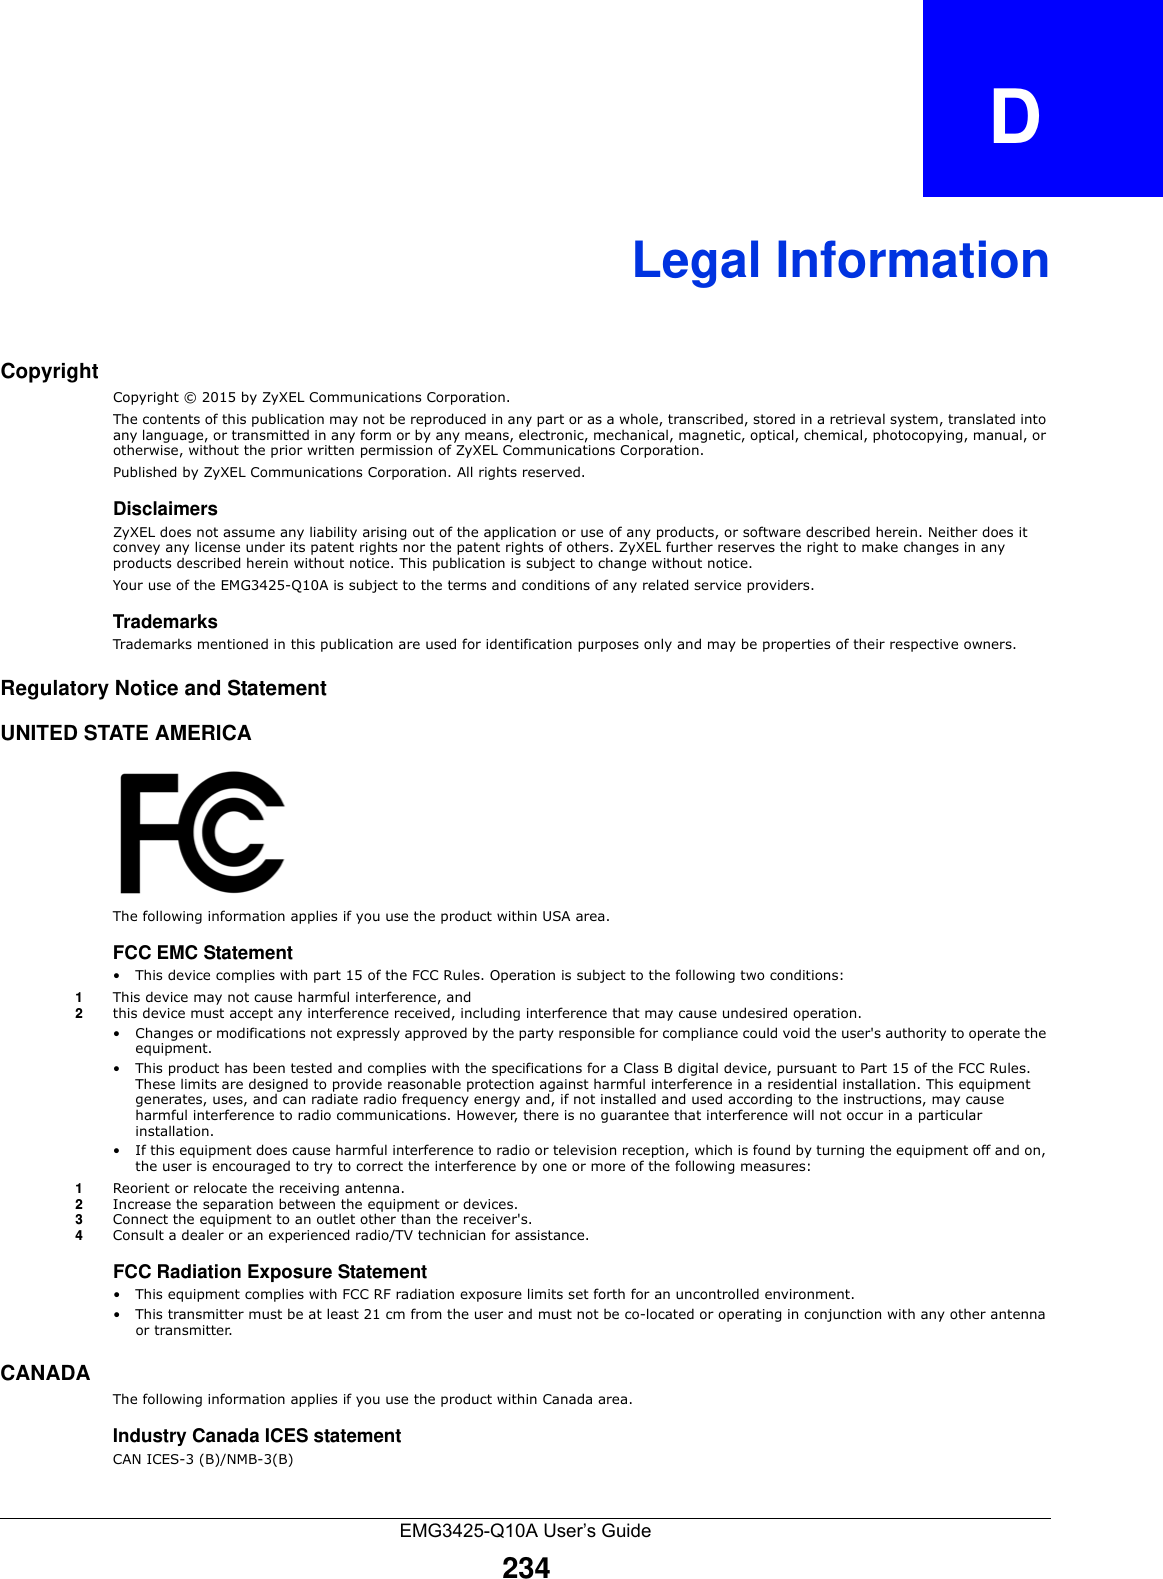 EMG3425-Q10A User’s Guide234APPENDIX   DLegal InformationCopyrightCopyright © 2015 by ZyXEL Communications Corporation.The contents of this publication may not be reproduced in any part or as a whole, transcribed, stored in a retrieval system, translated into any language, or transmitted in any form or by any means, electronic, mechanical, magnetic, optical, chemical, photocopying, manual, or otherwise, without the prior written permission of ZyXEL Communications Corporation.Published by ZyXEL Communications Corporation. All rights reserved.DisclaimersZyXEL does not assume any liability arising out of the application or use of any products, or software described herein. Neither does it convey any license under its patent rights nor the patent rights of others. ZyXEL further reserves the right to make changes in any products described herein without notice. This publication is subject to change without notice.Your use of the EMG3425-Q10A is subject to the terms and conditions of any related service providers. TrademarksTrademarks mentioned in this publication are used for identification purposes only and may be properties of their respective owners.Regulatory Notice and StatementUNITED STATE AMERICAThe following information applies if you use the product within USA area.FCC EMC Statement • This device complies with part 15 of the FCC Rules. Operation is subject to the following two conditions:1This device may not cause harmful interference, and 2this device must accept any interference received, including interference that may cause undesired operation.• Changes or modifications not expressly approved by the party responsible for compliance could void the user&apos;s authority to operate the equipment.• This product has been tested and complies with the specifications for a Class B digital device, pursuant to Part 15 of the FCC Rules. These limits are designed to provide reasonable protection against harmful interference in a residential installation. This equipment generates, uses, and can radiate radio frequency energy and, if not installed and used according to the instructions, may cause harmful interference to radio communications. However, there is no guarantee that interference will not occur in a particular installation. • If this equipment does cause harmful interference to radio or television reception, which is found by turning the equipment off and on, the user is encouraged to try to correct the interference by one or more of the following measures:1Reorient or relocate the receiving antenna.2Increase the separation between the equipment or devices.3Connect the equipment to an outlet other than the receiver&apos;s.4Consult a dealer or an experienced radio/TV technician for assistance.FCC Radiation Exposure Statement• This equipment complies with FCC RF radiation exposure limits set forth for an uncontrolled environment. • This transmitter must be at least 21 cm from the user and must not be co-located or operating in conjunction with any other antenna or transmitter.CANADAThe following information applies if you use the product within Canada area.Industry Canada ICES statementCAN ICES-3 (B)/NMB-3(B)